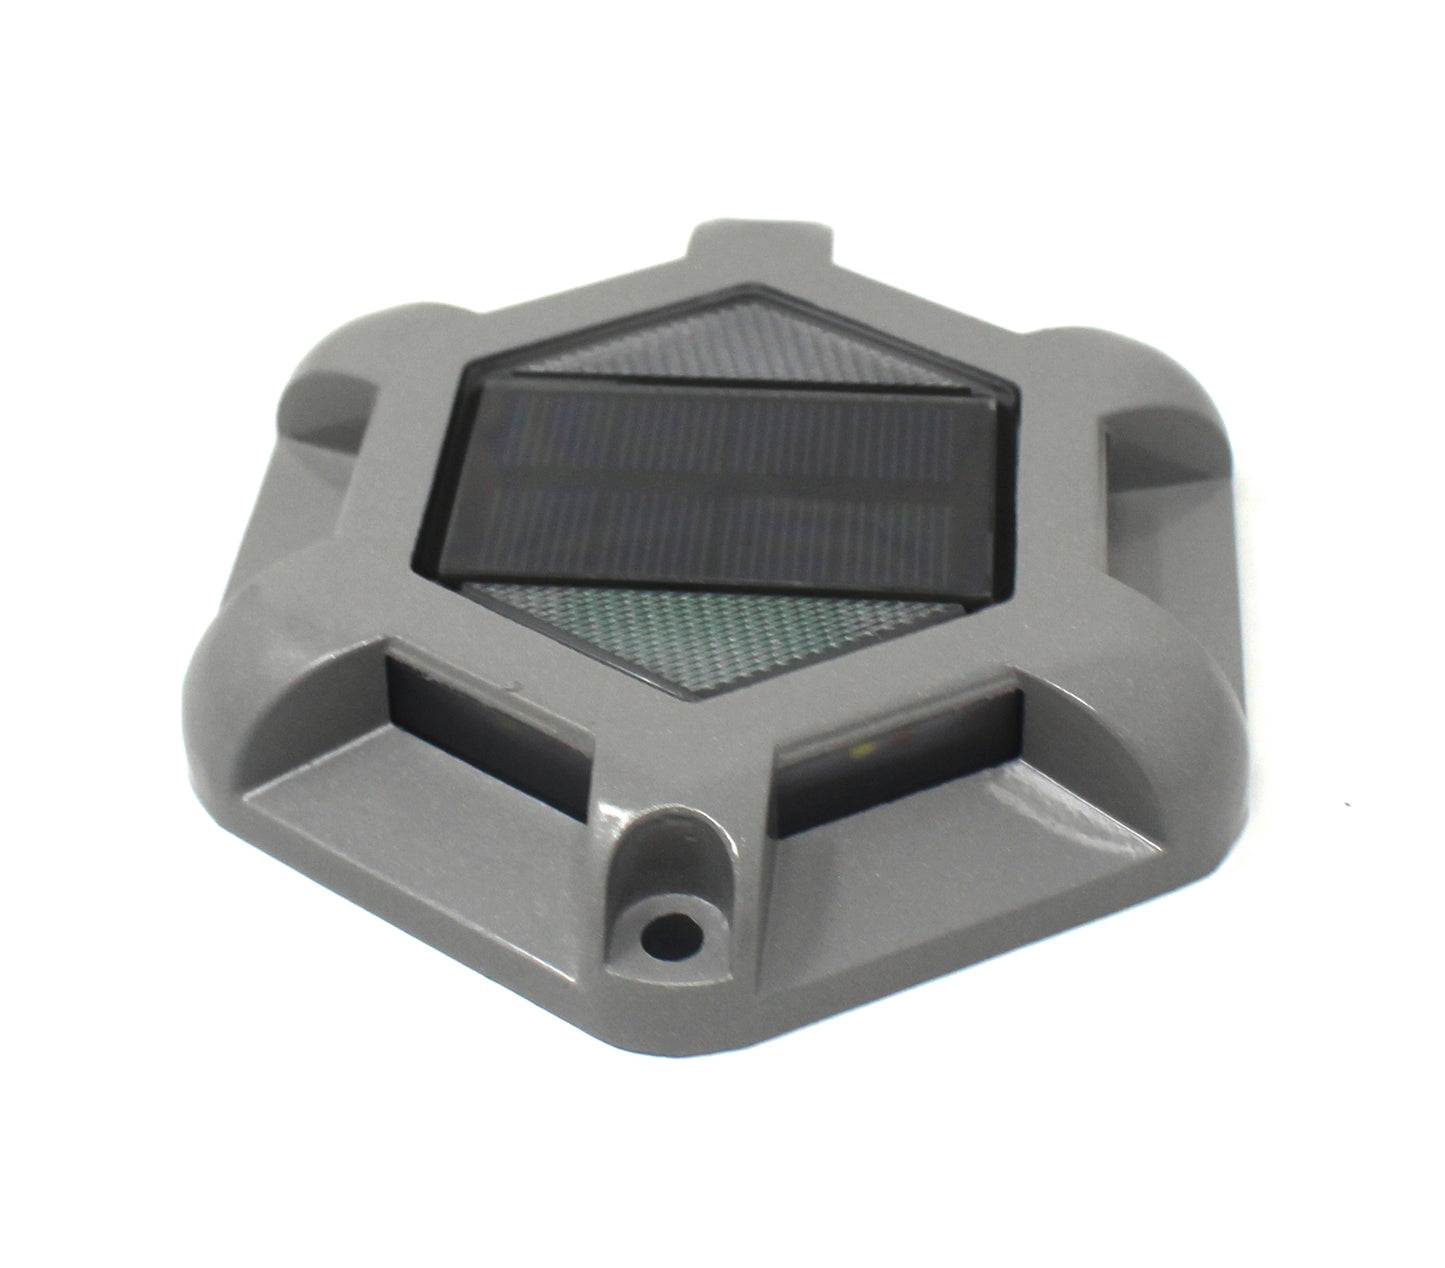 Flat Dock Piling Cap with Outdoor Solar Powered Waterproof LED White Light | Black or White Caps 8" 9" 10" 11" 12"